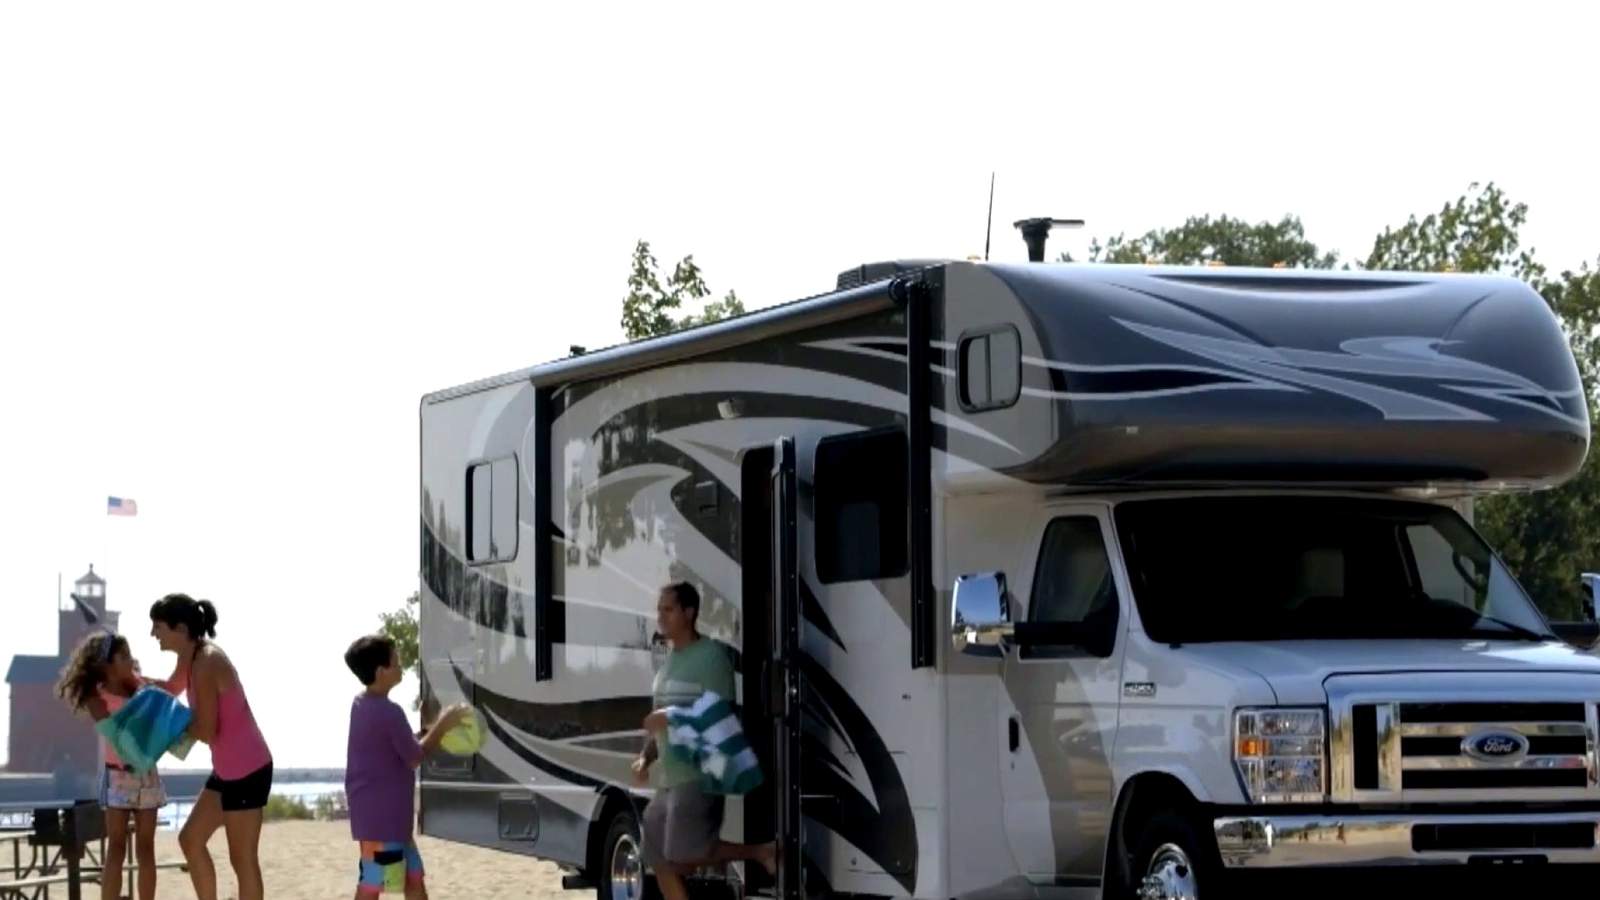 Texas is one of the top RV destinations amid the pandemic, survey says